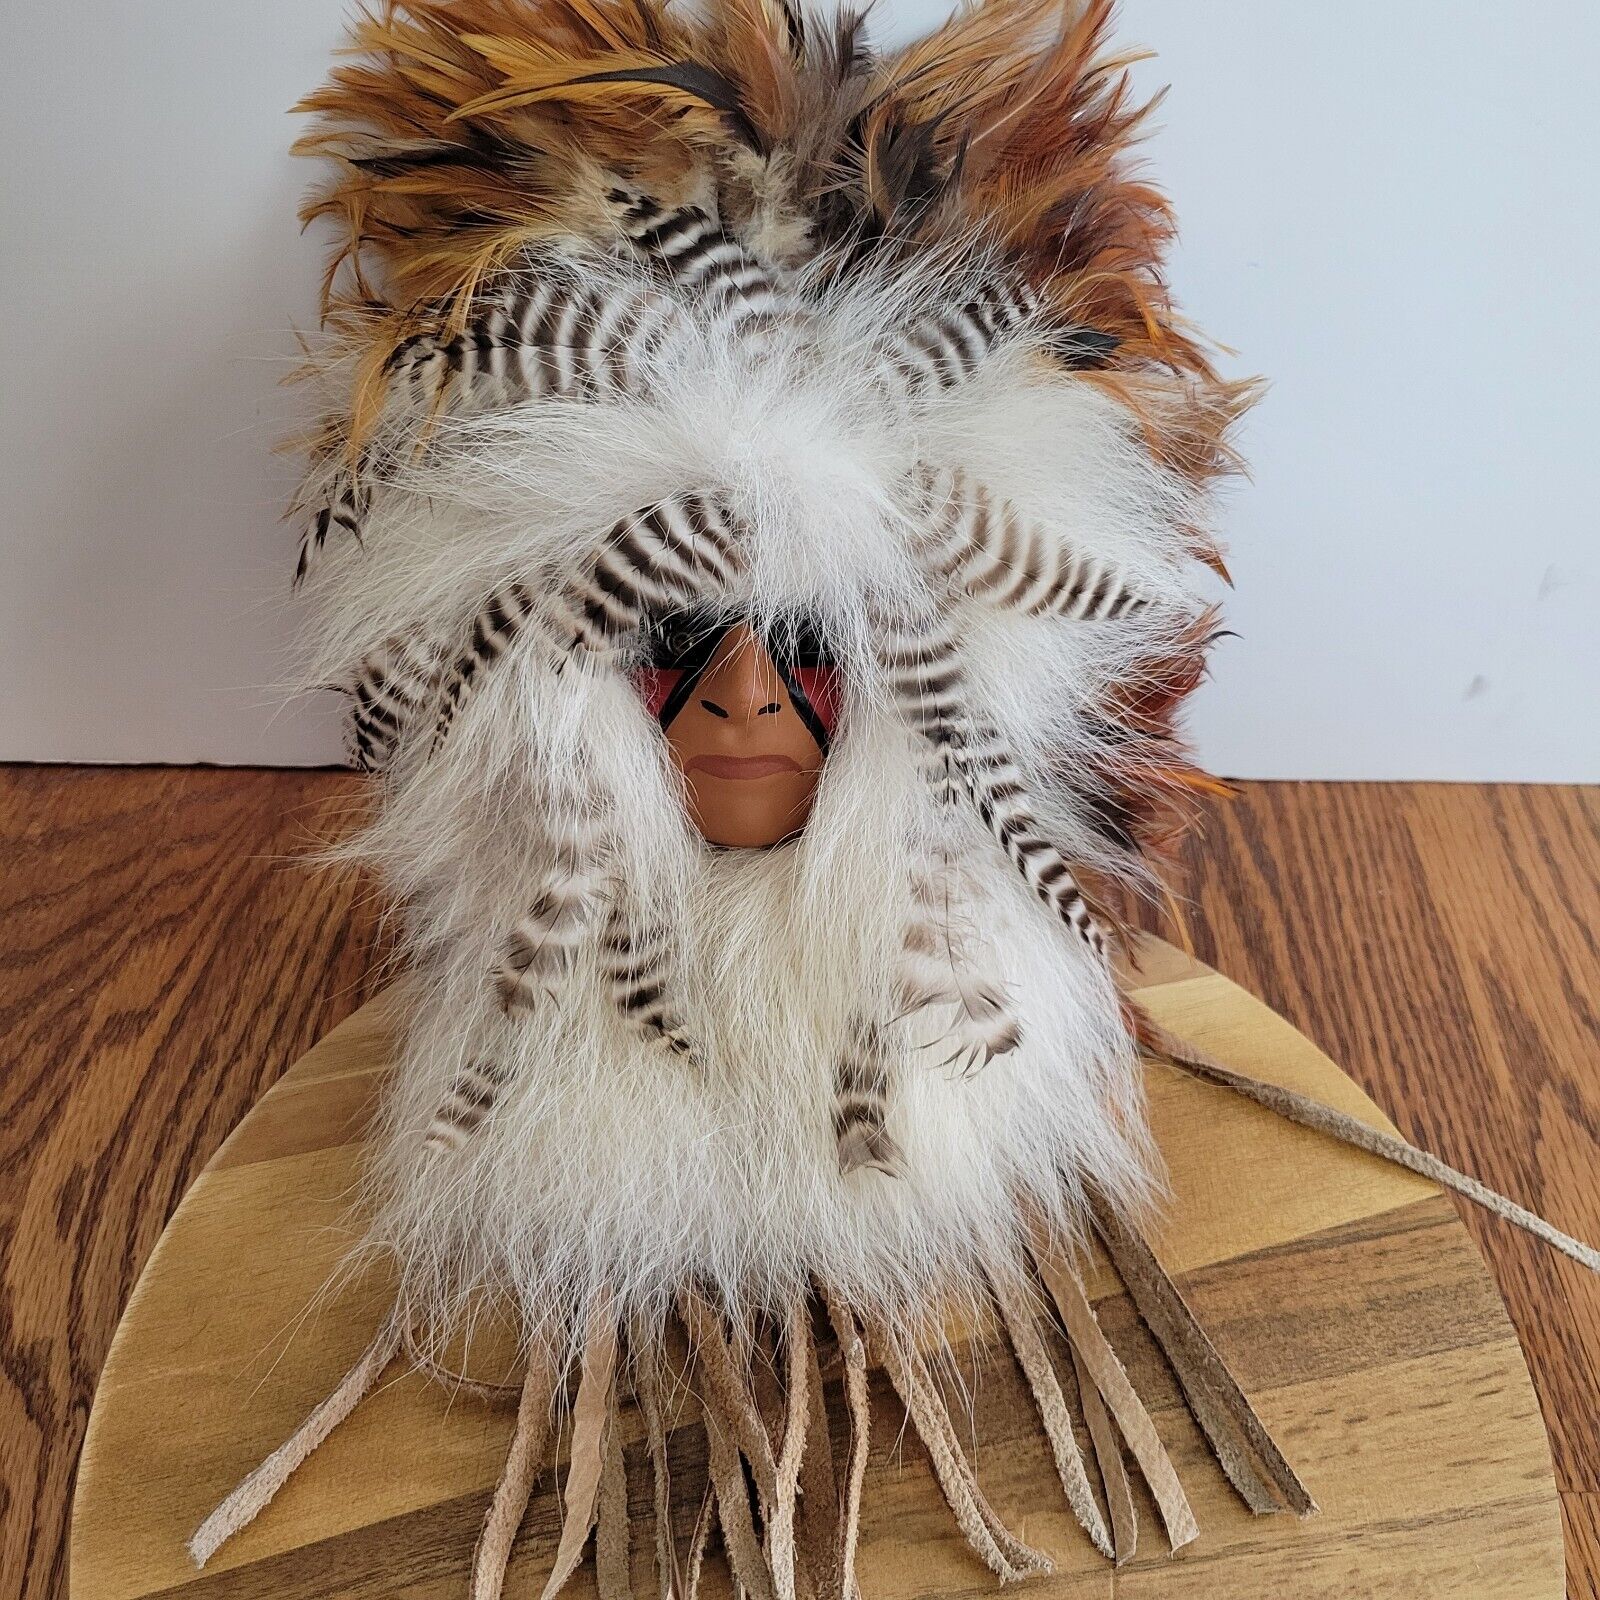 Native American Spirit Mask/Feathers/White Fur/Leather/Wall Hanging Hand Painted